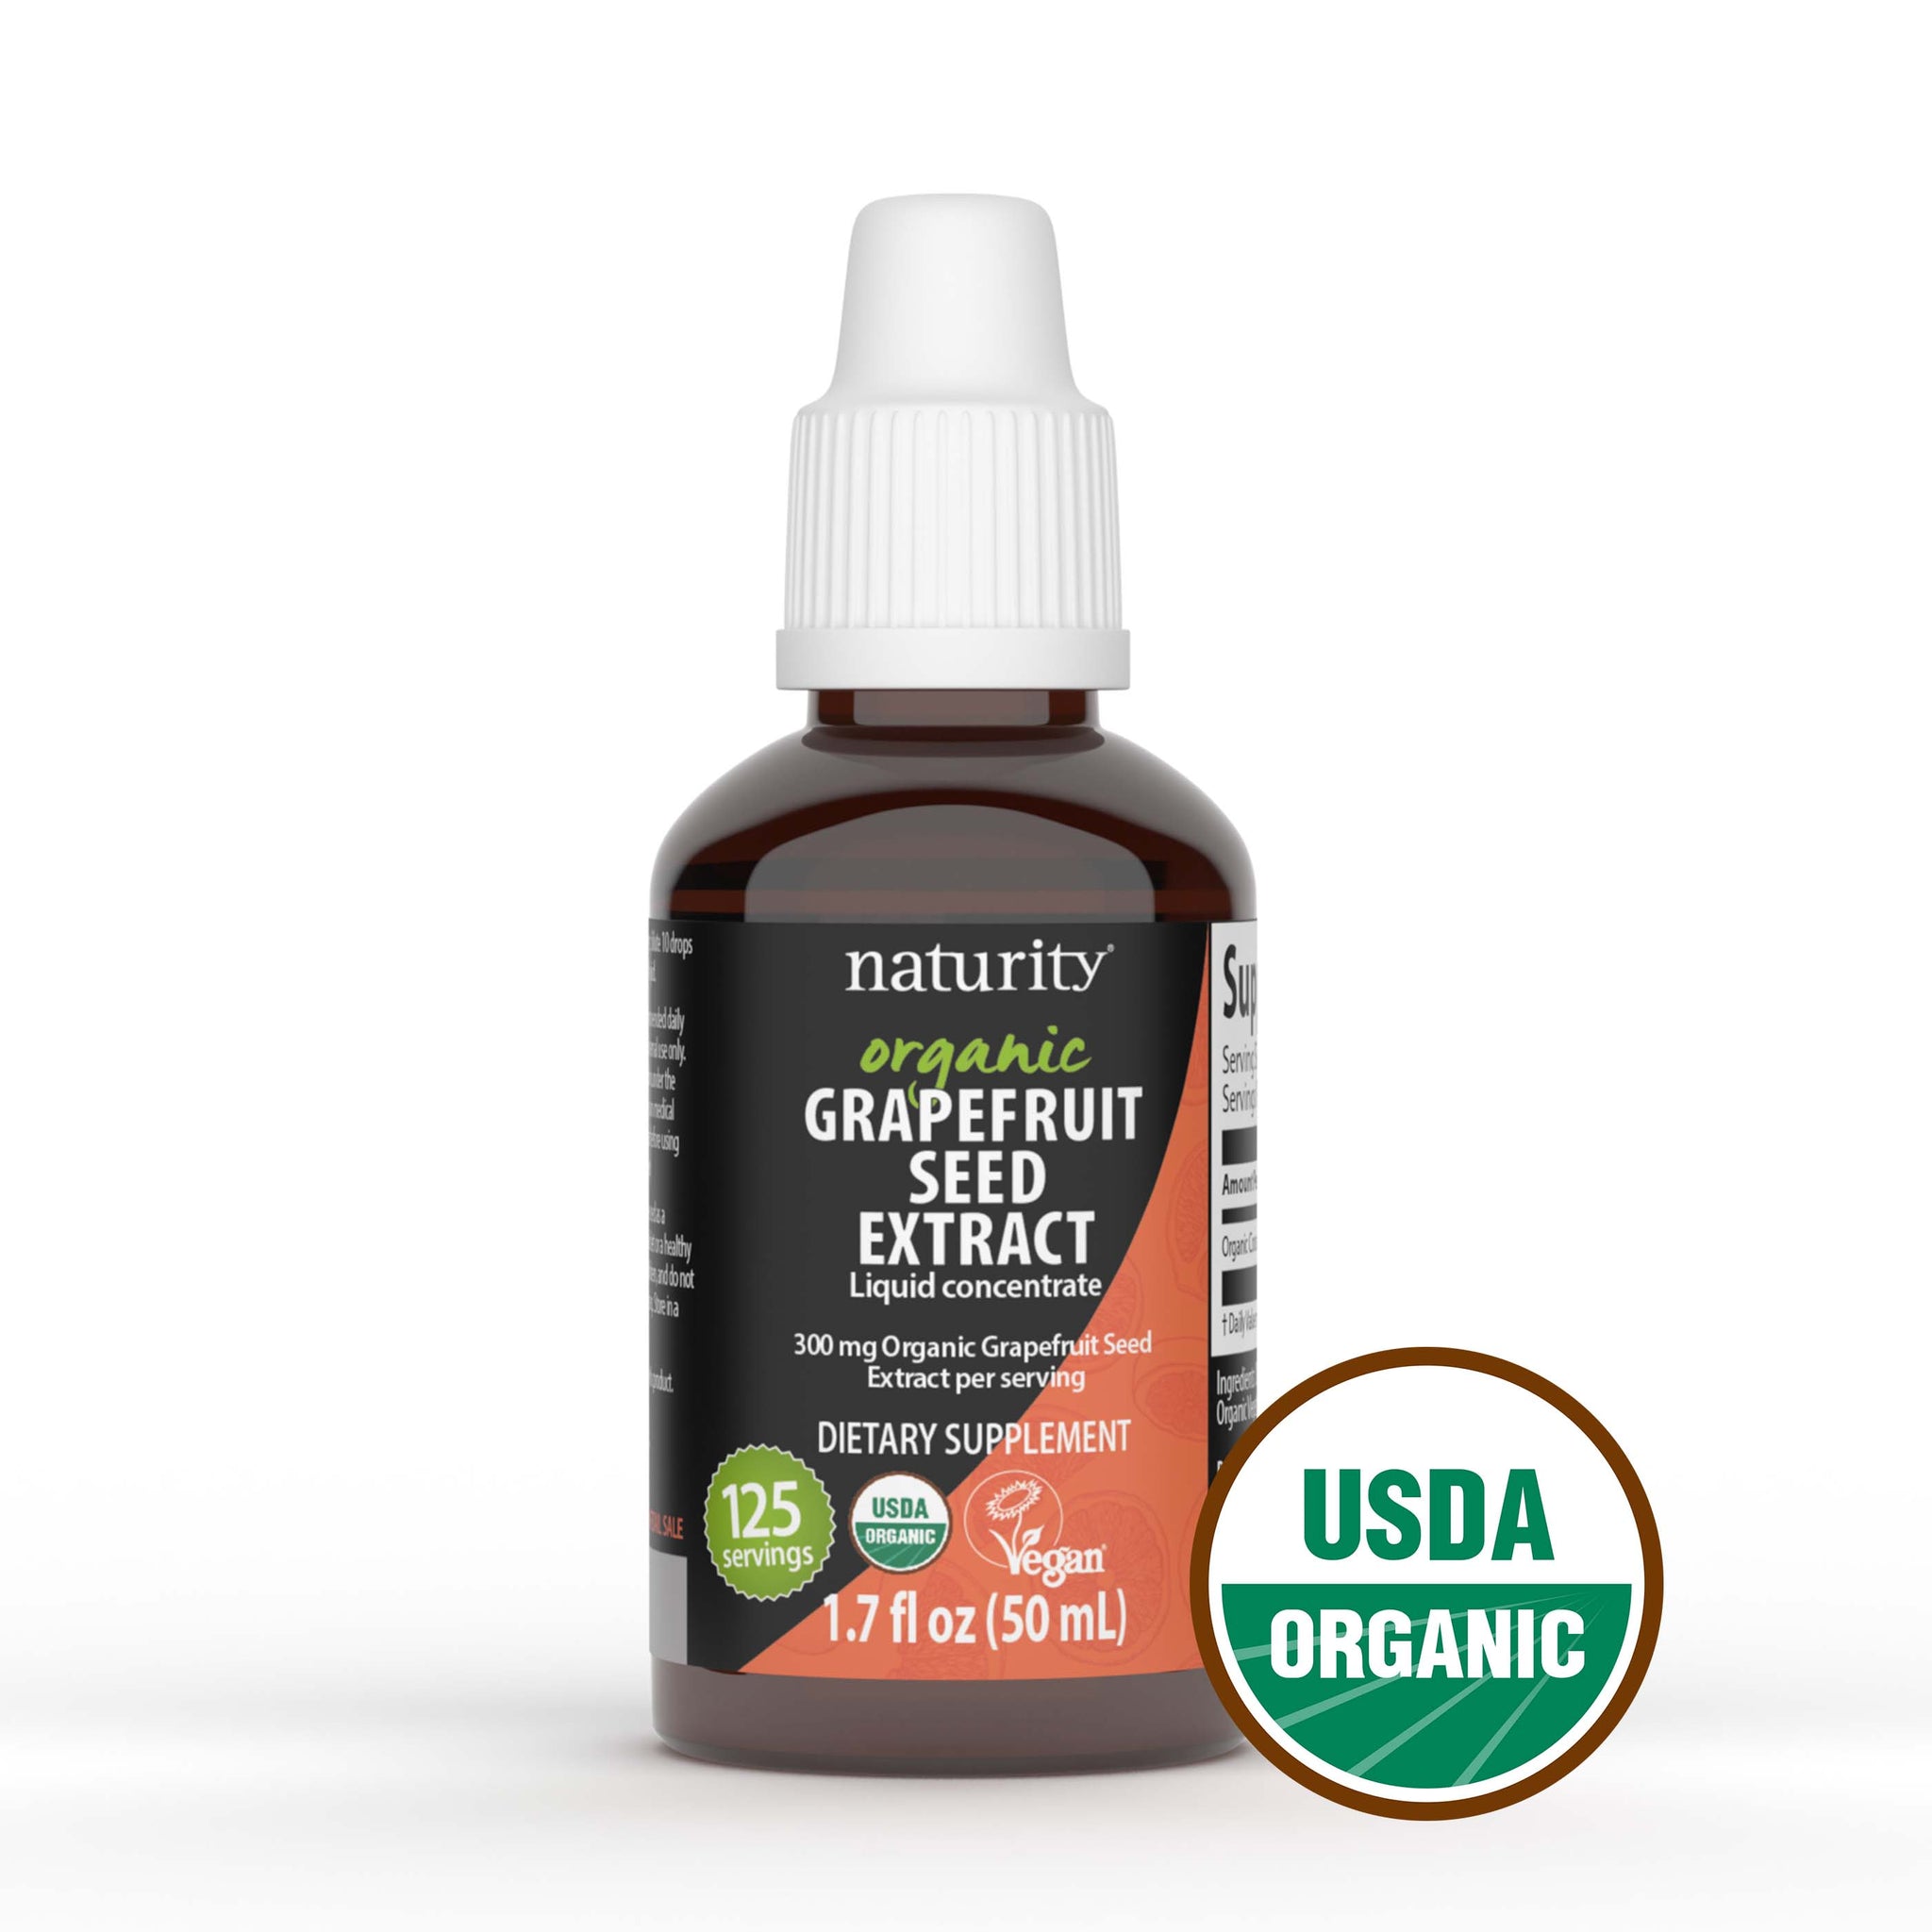 Organic Grapefruit Seed Extract - Liquid Concentrate - 50ml